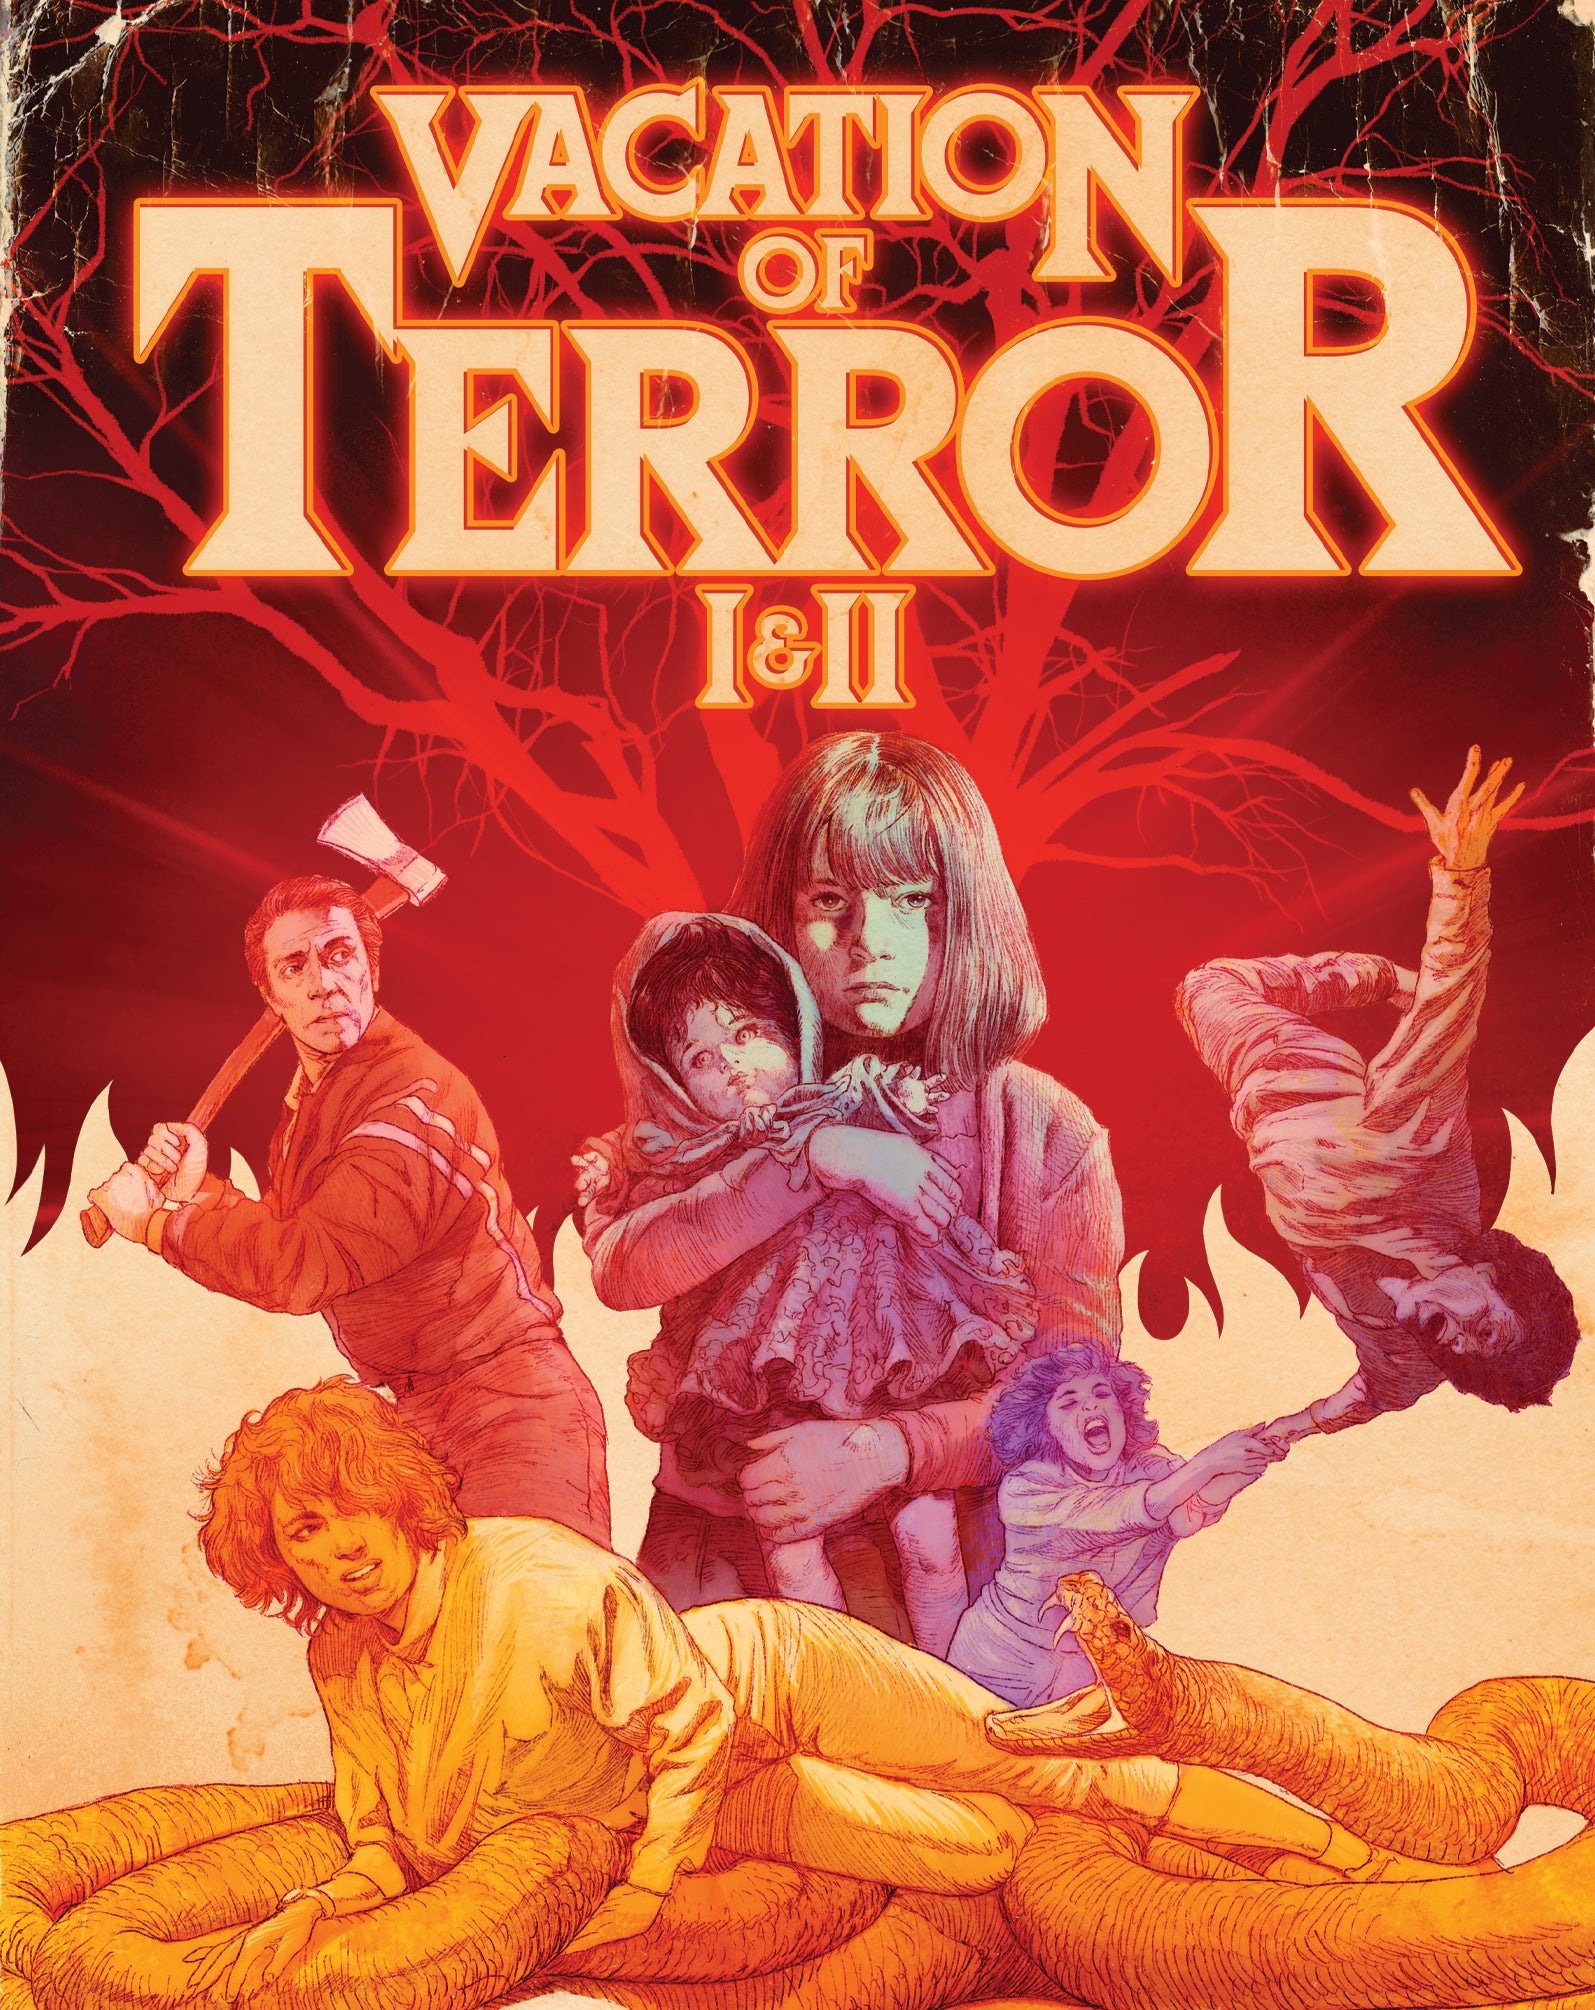 VACATION OF TERROR I & II (LIMITED EDITION) BLU-RAY